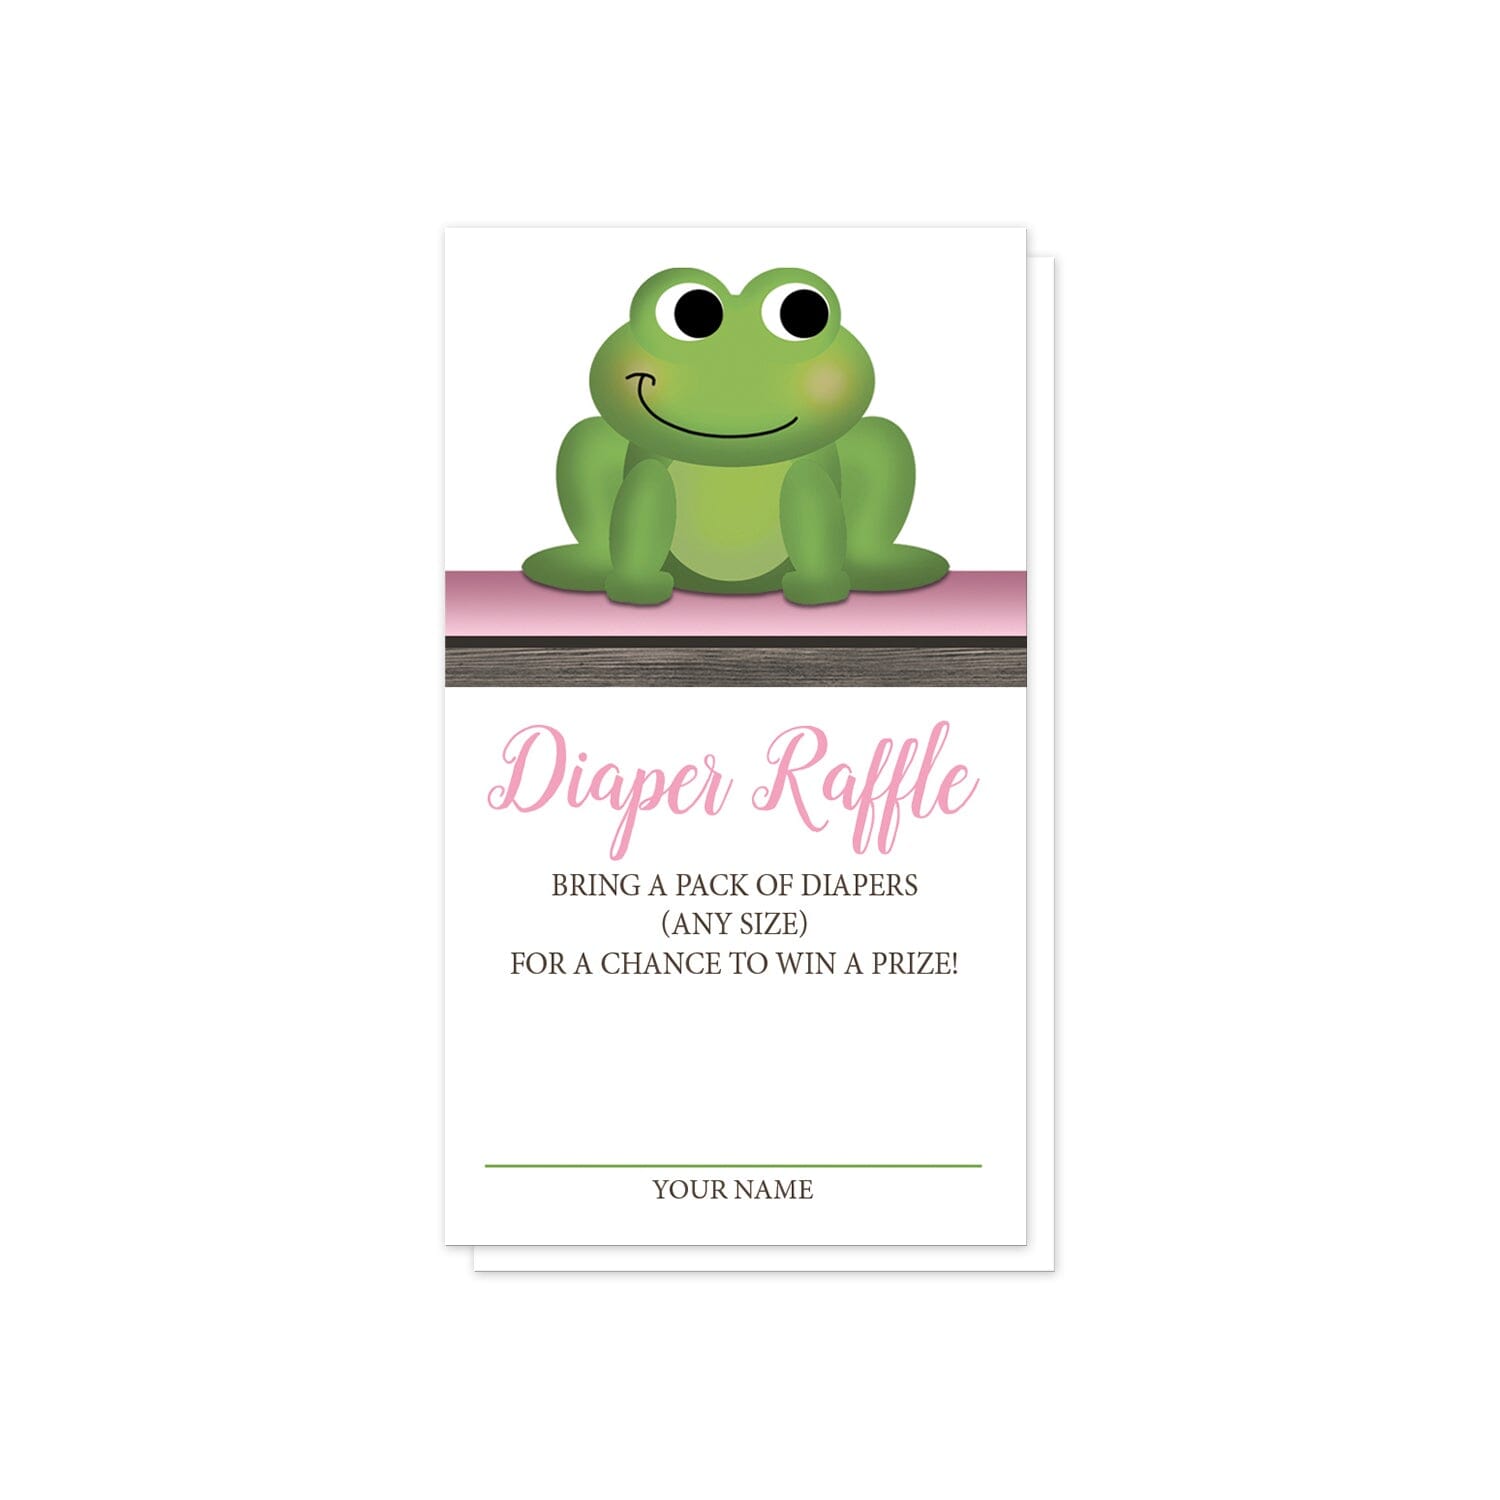 Cute Frog Green Pink Rustic Brown Diaper Raffle Cards at Artistically Invited. Cute frog green pink rustic brown diaper raffle cards with a happy and adorable green frog sitting on a pink and brown wood stripe at the top of the cards. Your diaper raffle details are printed in pink and brown with a green line for the name on white below the cute frog. 